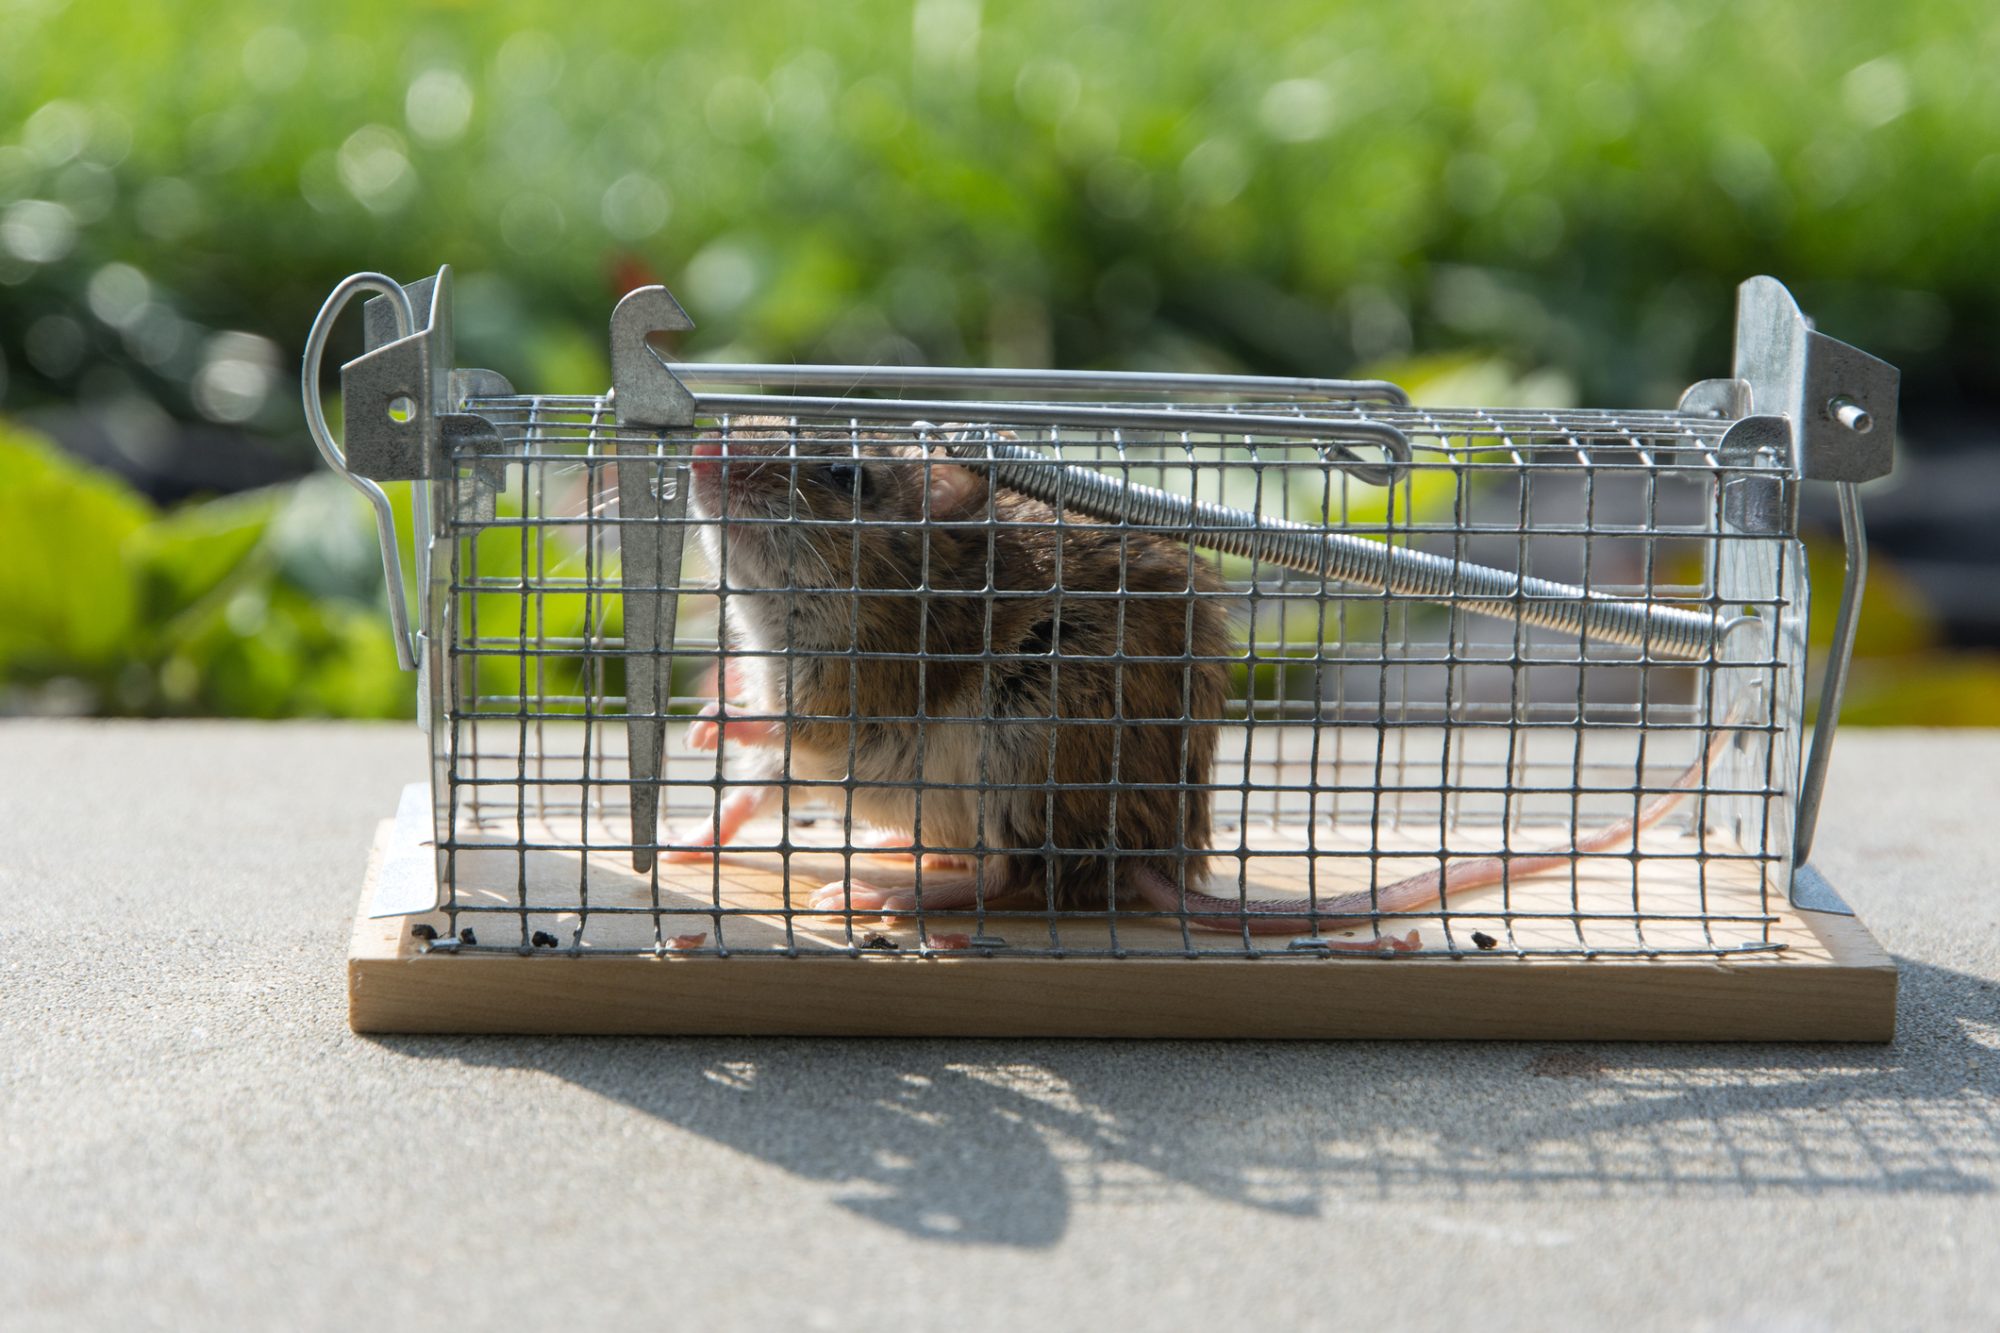 View of mouse caught in a non-hurt cage trap